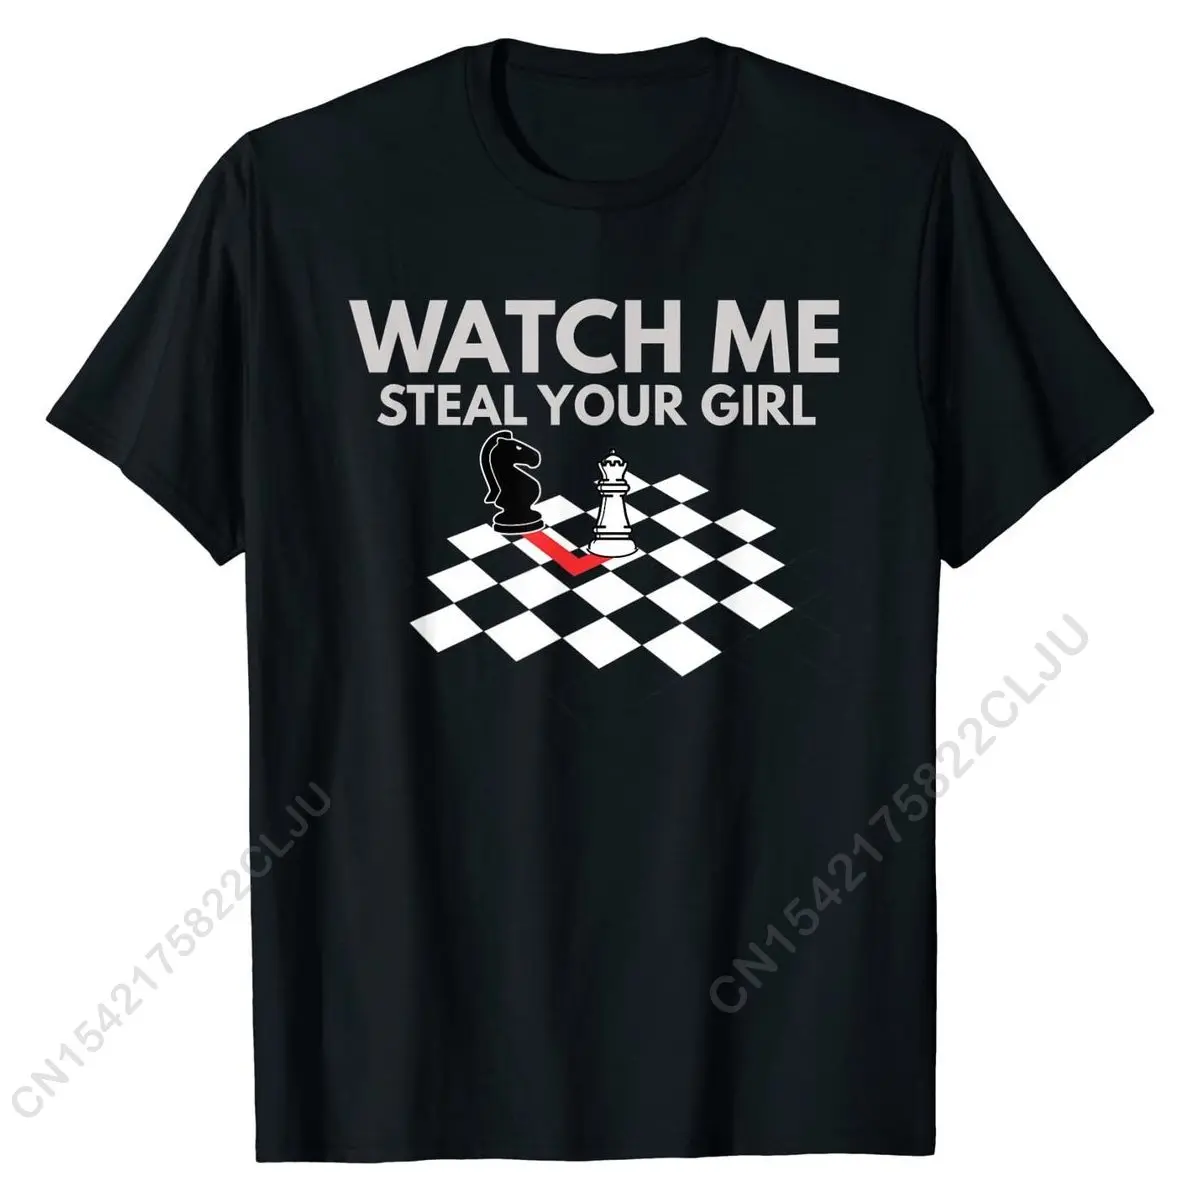 

Watch Me Steal Your Girl T Shirt - Funny Chess Shirts Cotton Men Tees For Students Printed On T Shirts Normal Prevailing